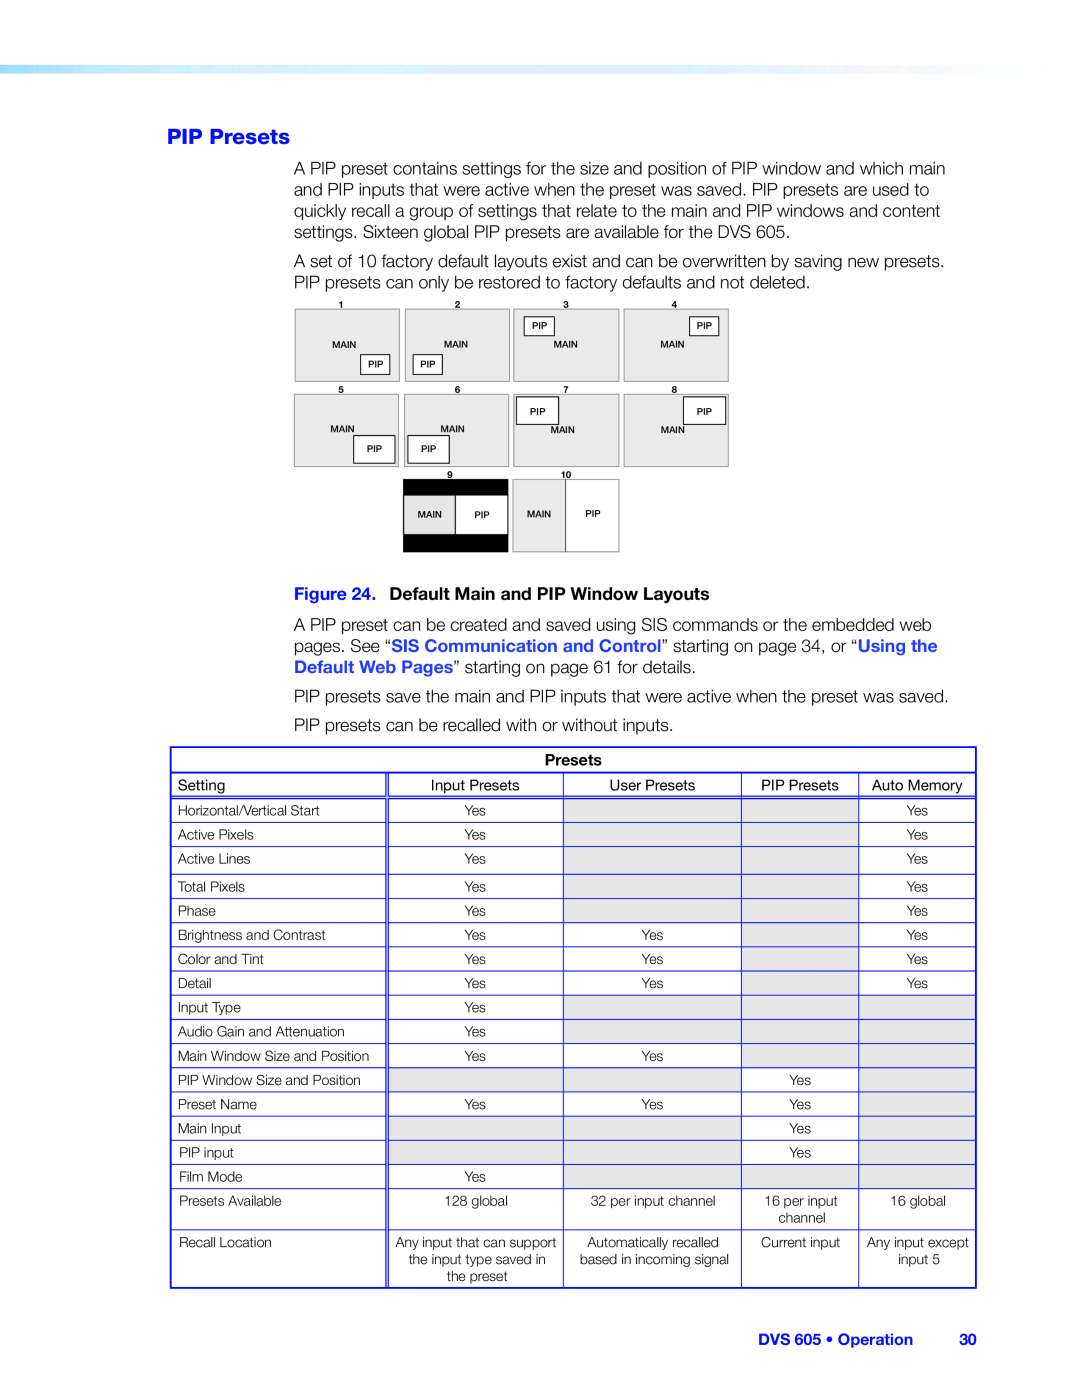 Extron electronic DVS 605 manual PIP Presets, Default Main and PIP Window Layouts 